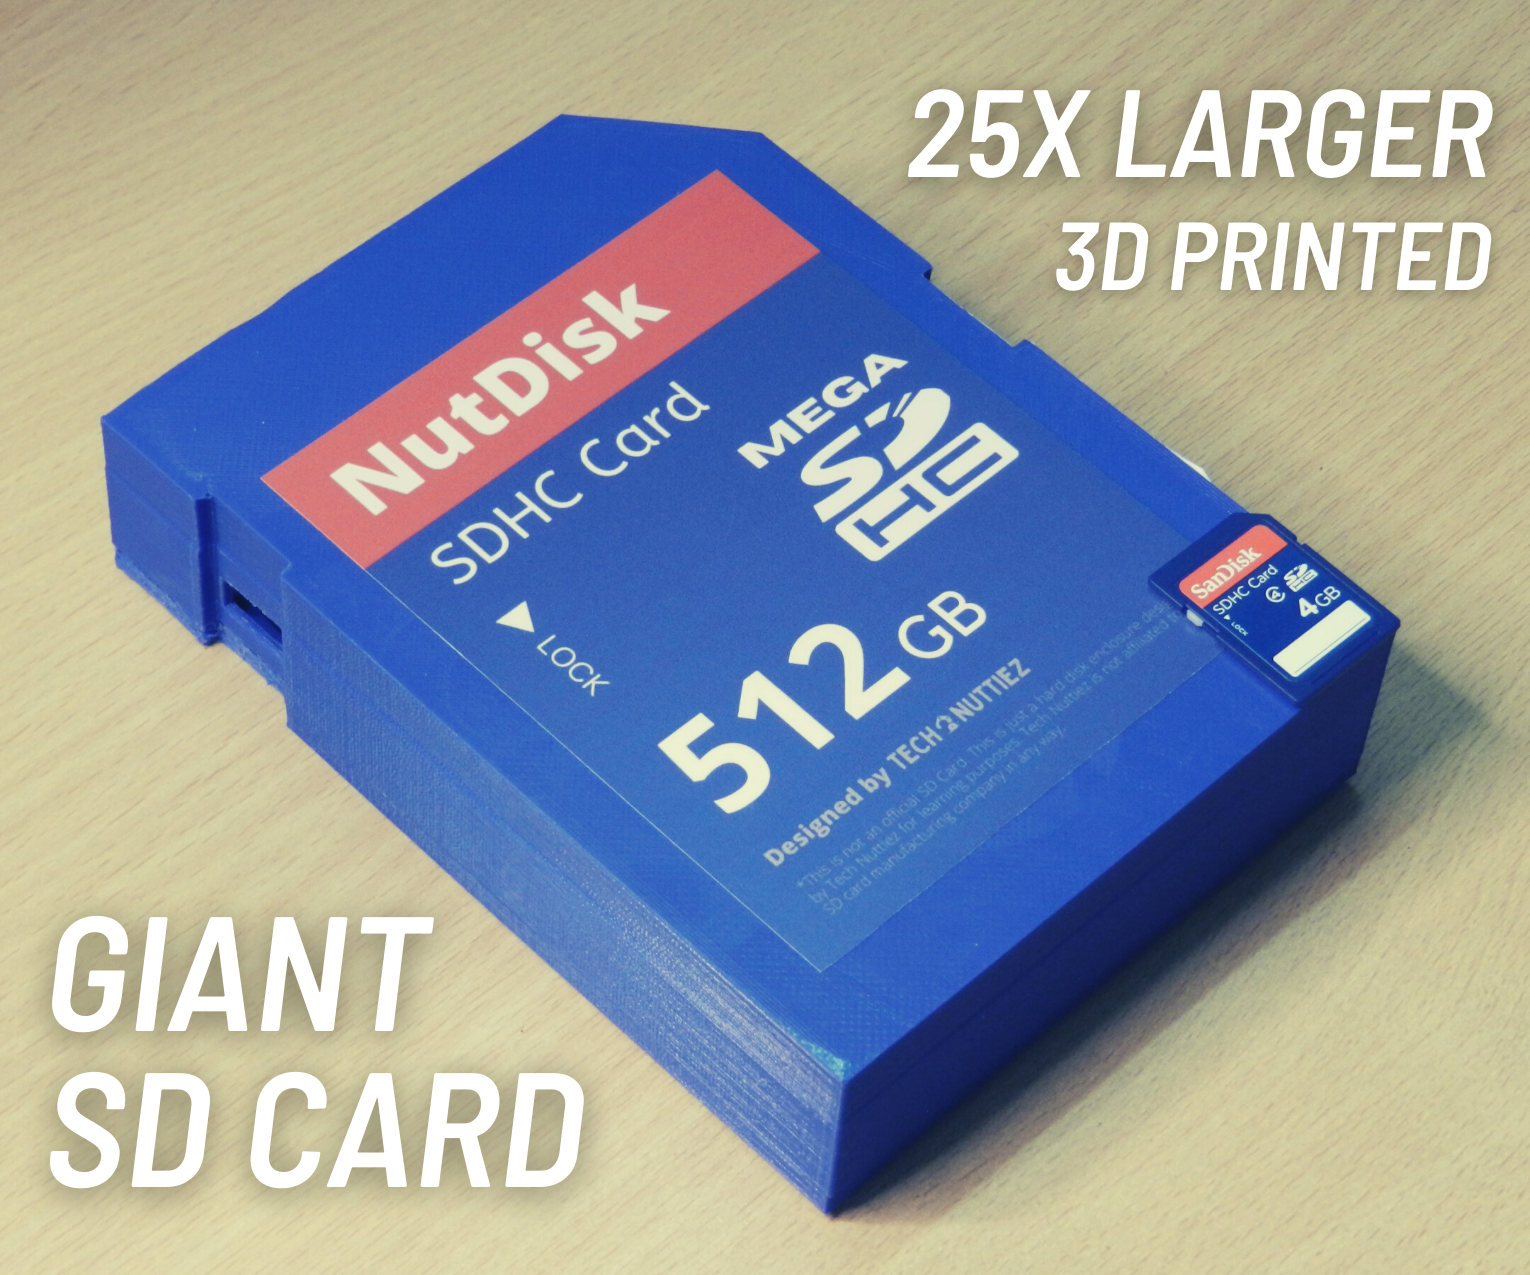 Giant 3D Printed SD Card That Works!!! (Contest Special)